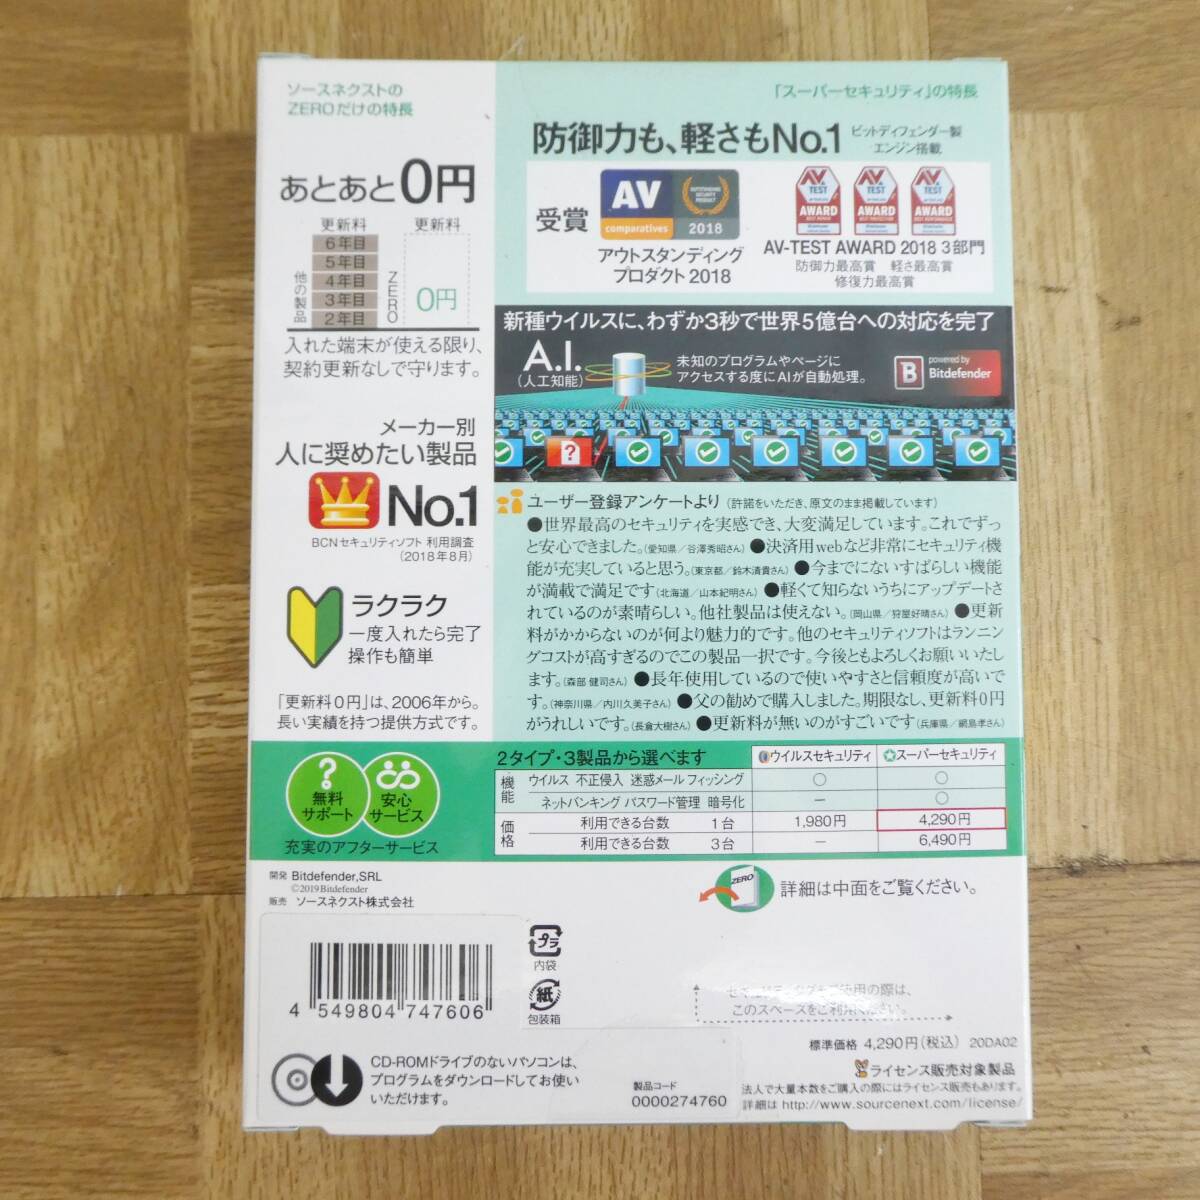 Q076[ unused ]ZERO super security 1 pcs for 2 piece set update charge 0 jpy time limit none Win,Mac,Android,iOS correspondence ③ /5